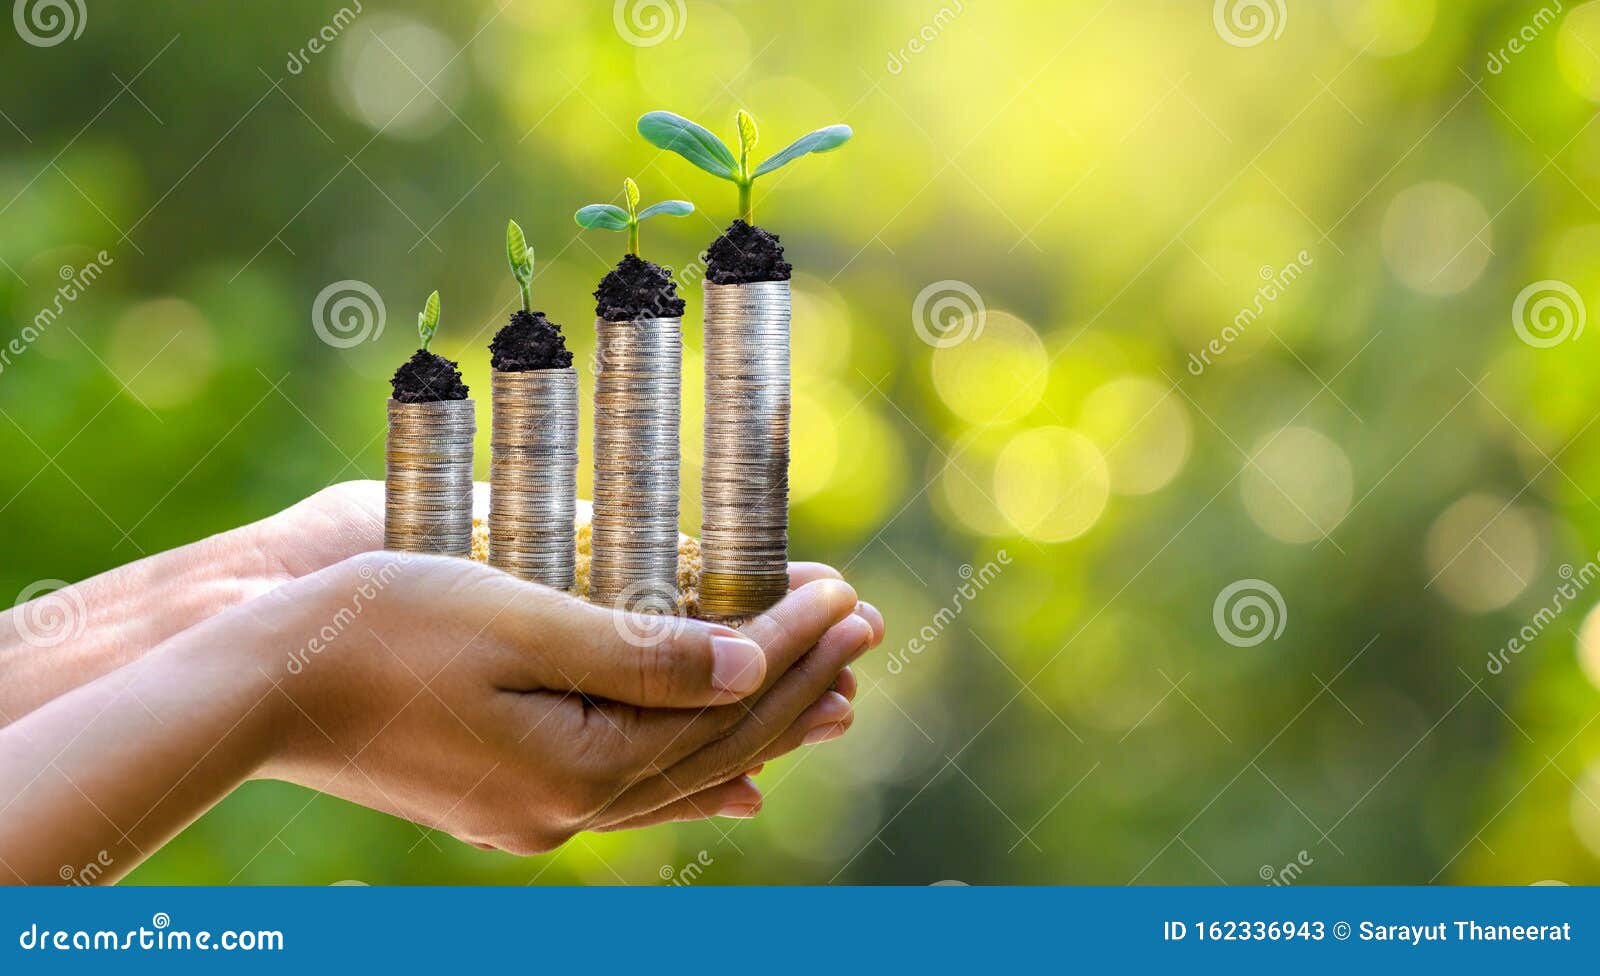 hand coin tree the tree grows on the pile. saving money for the future. investment ideas and business growth. green background